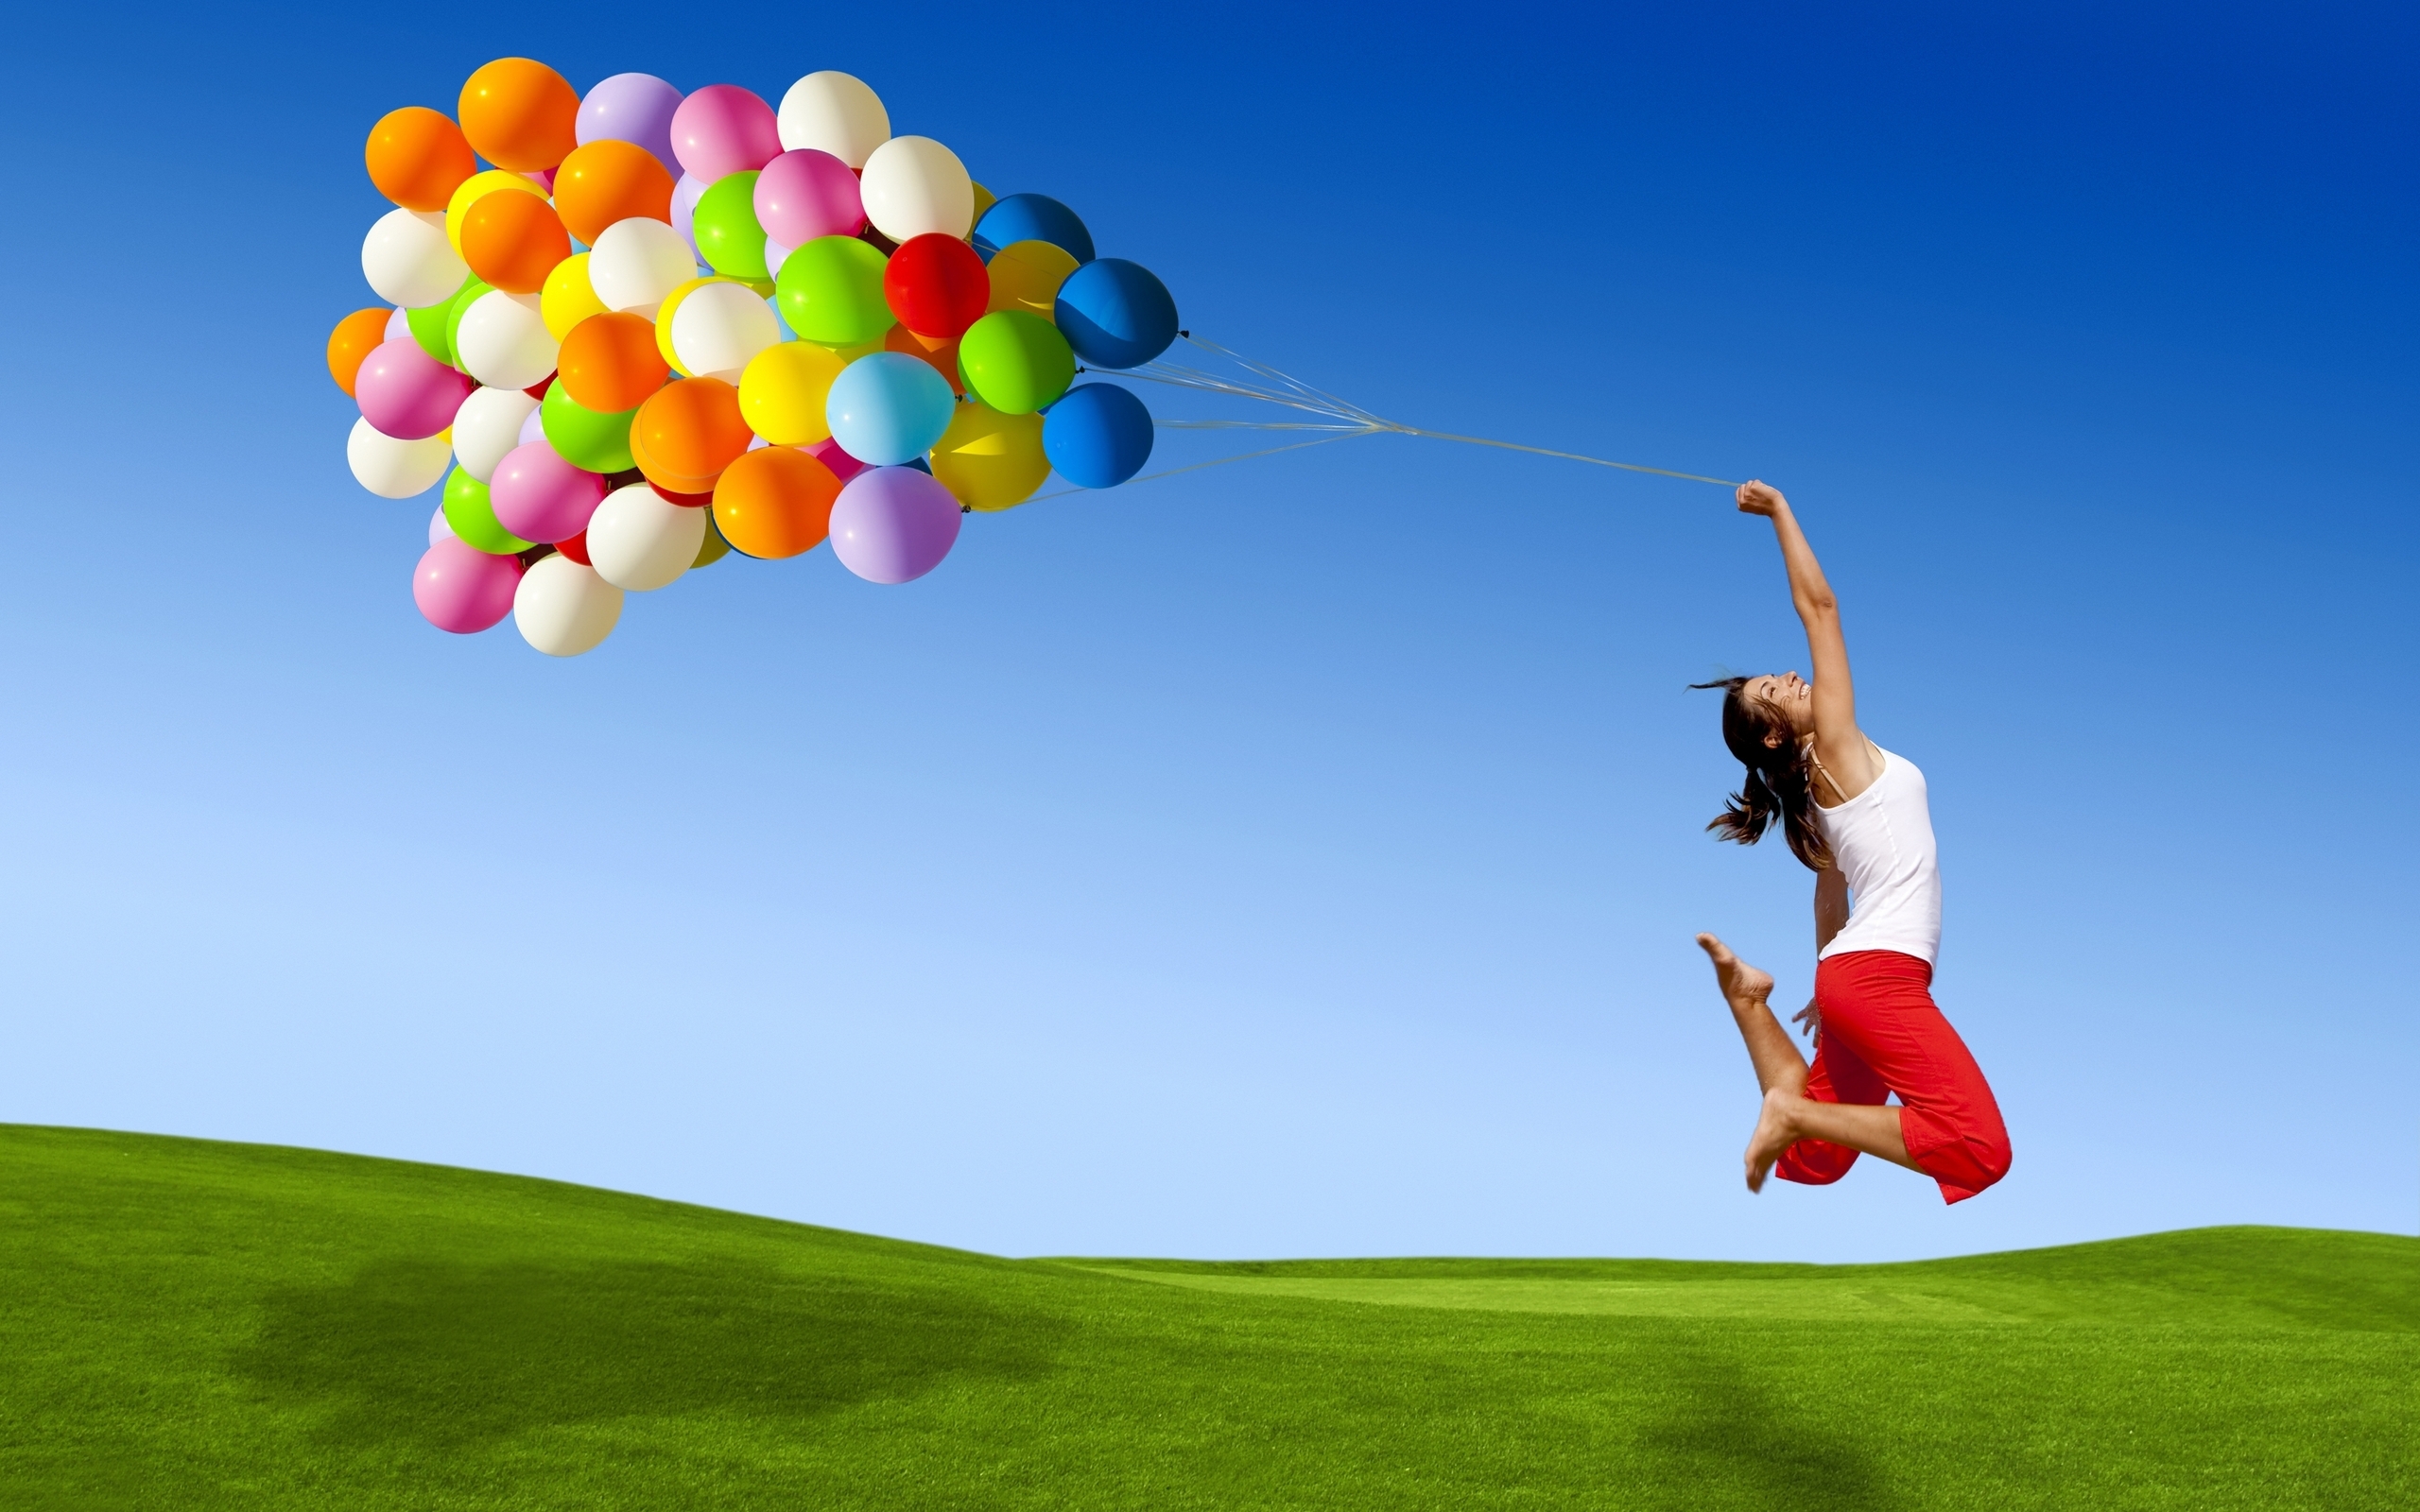 Hd Wallpapers For Laptop - Girl Jumping With Balloons - HD Wallpaper 